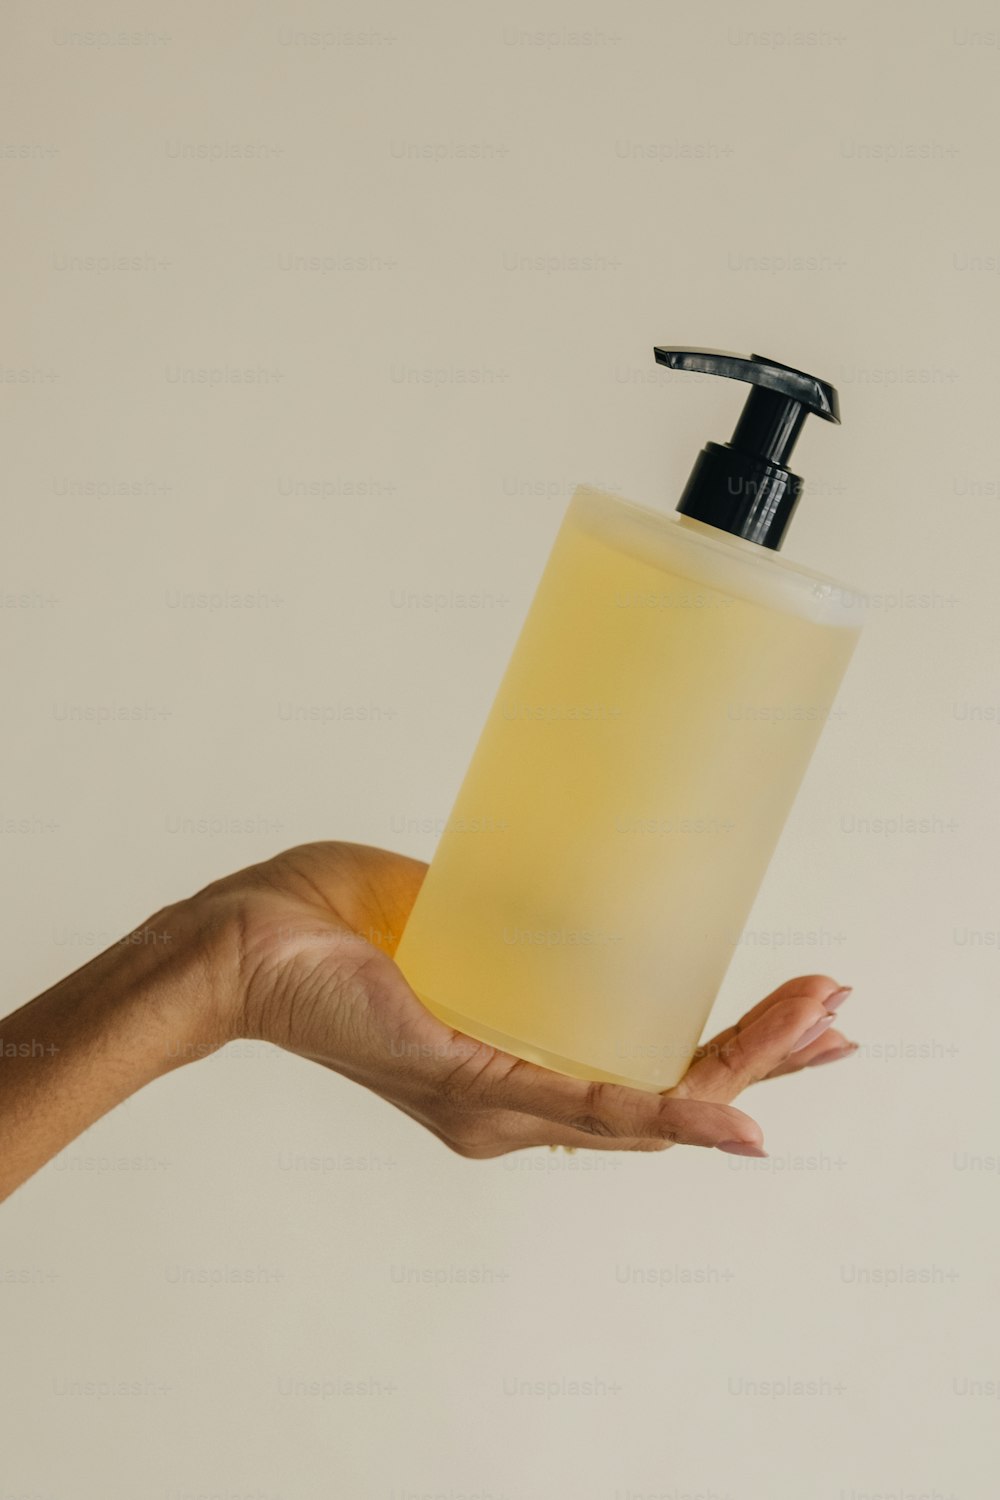 a hand holding a soap dispenser with a liquid in it